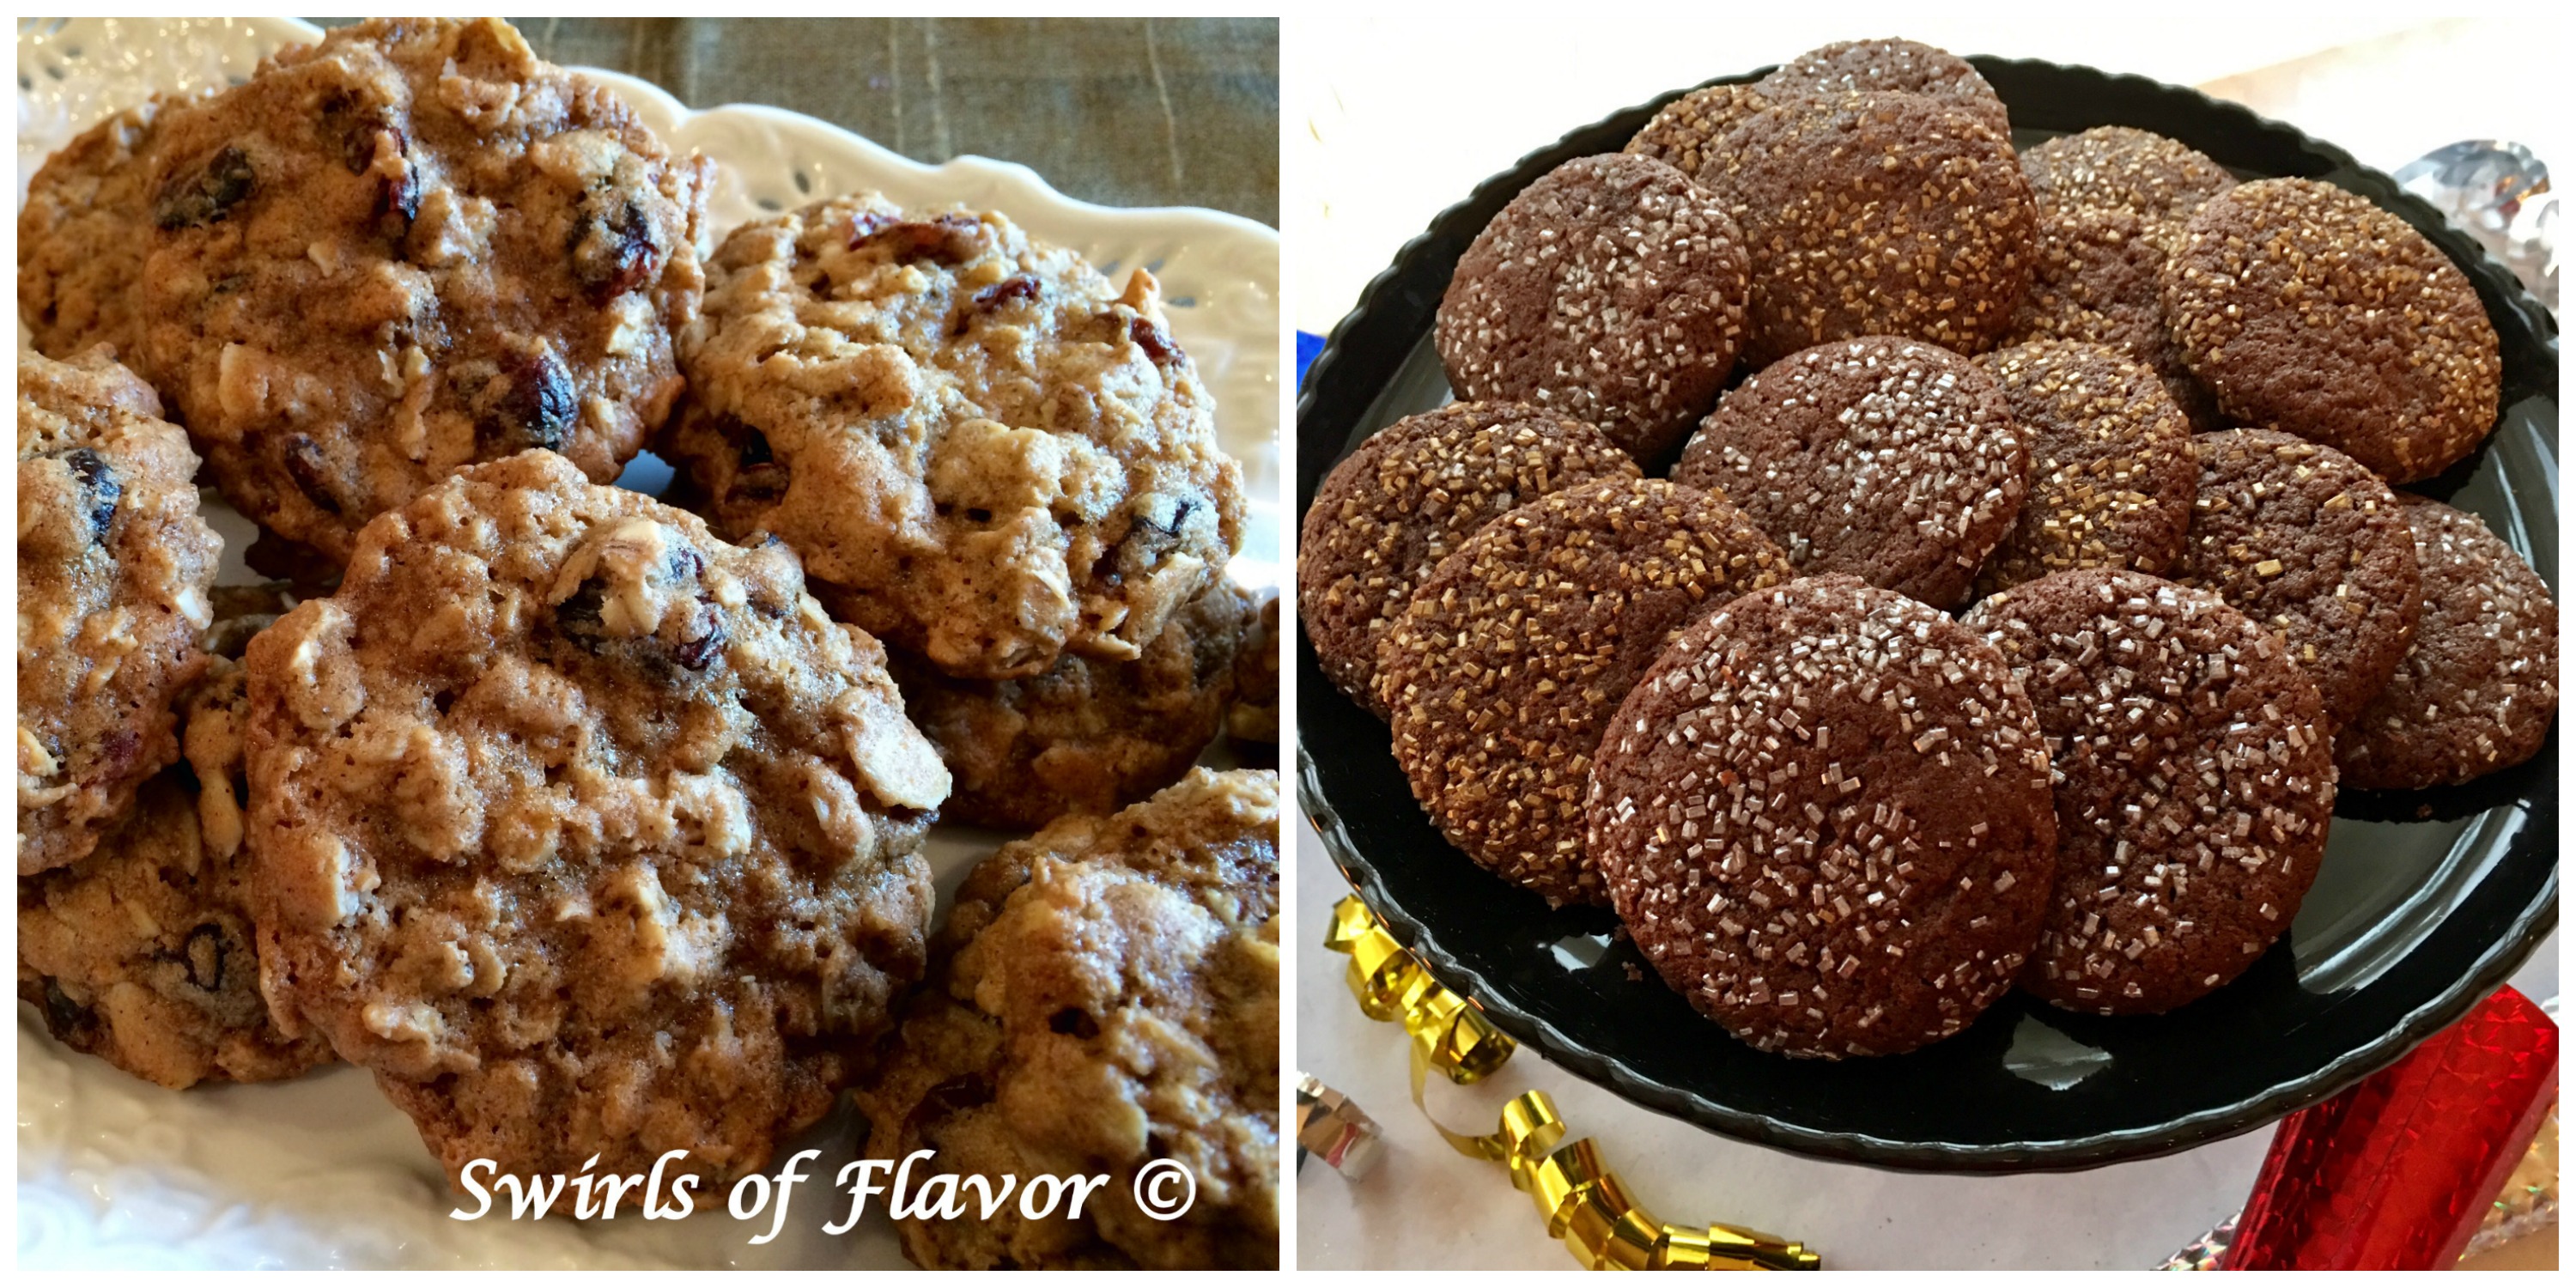 Cranberry Alomnd Oatmeal Cookies and Chocolate Glitter Cookies